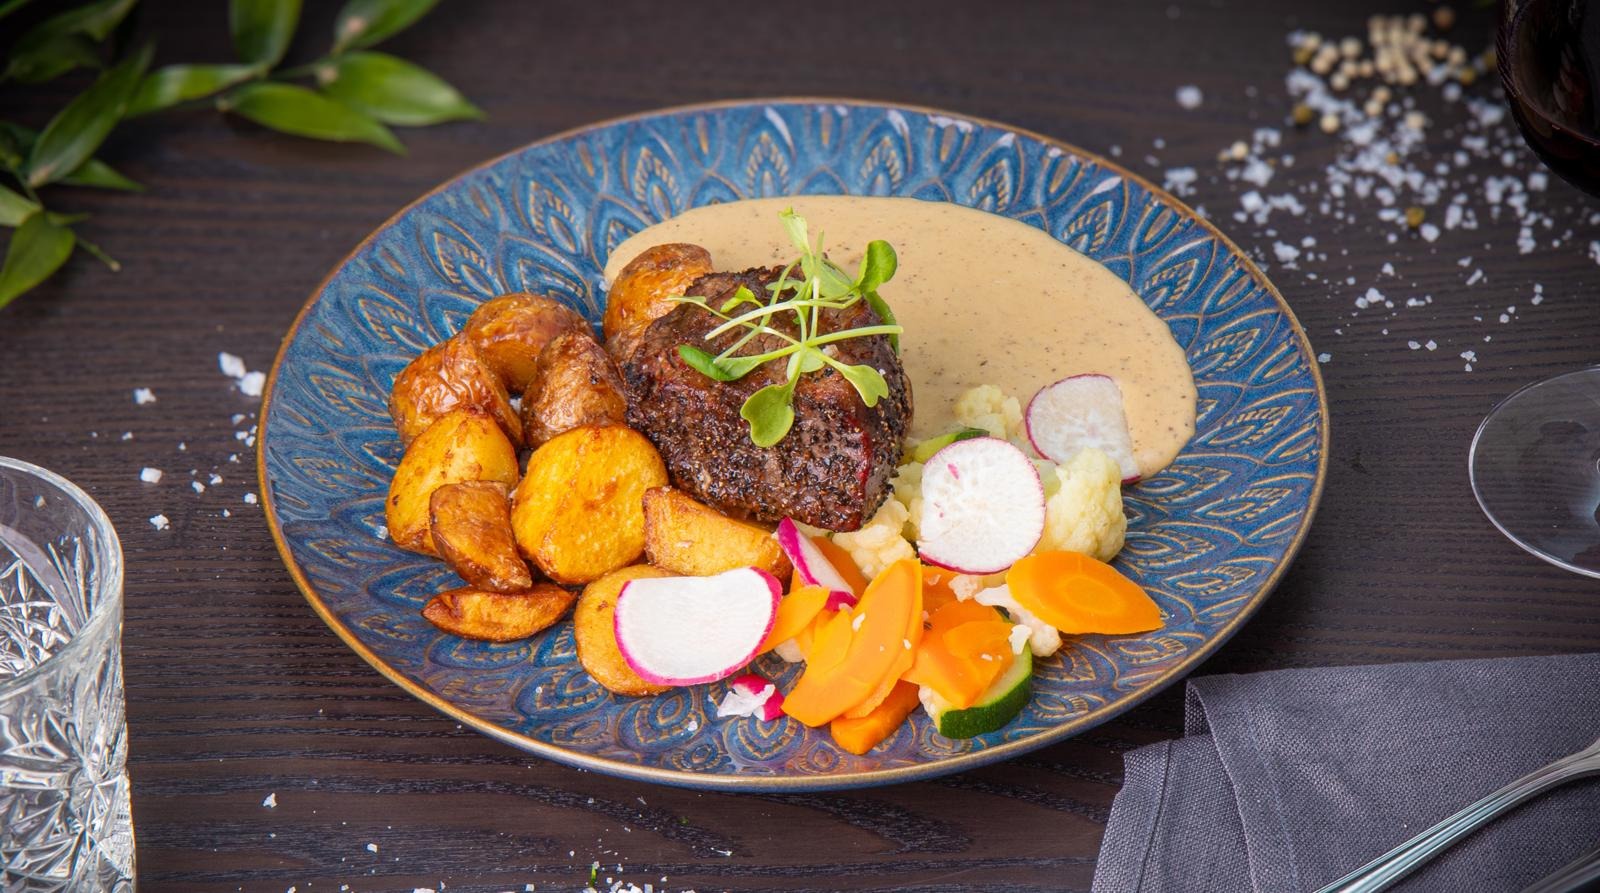 CLASSIC Mustakari’s pepper steak, pepper sauce with cognac, summer vegetables and roasted potatoes